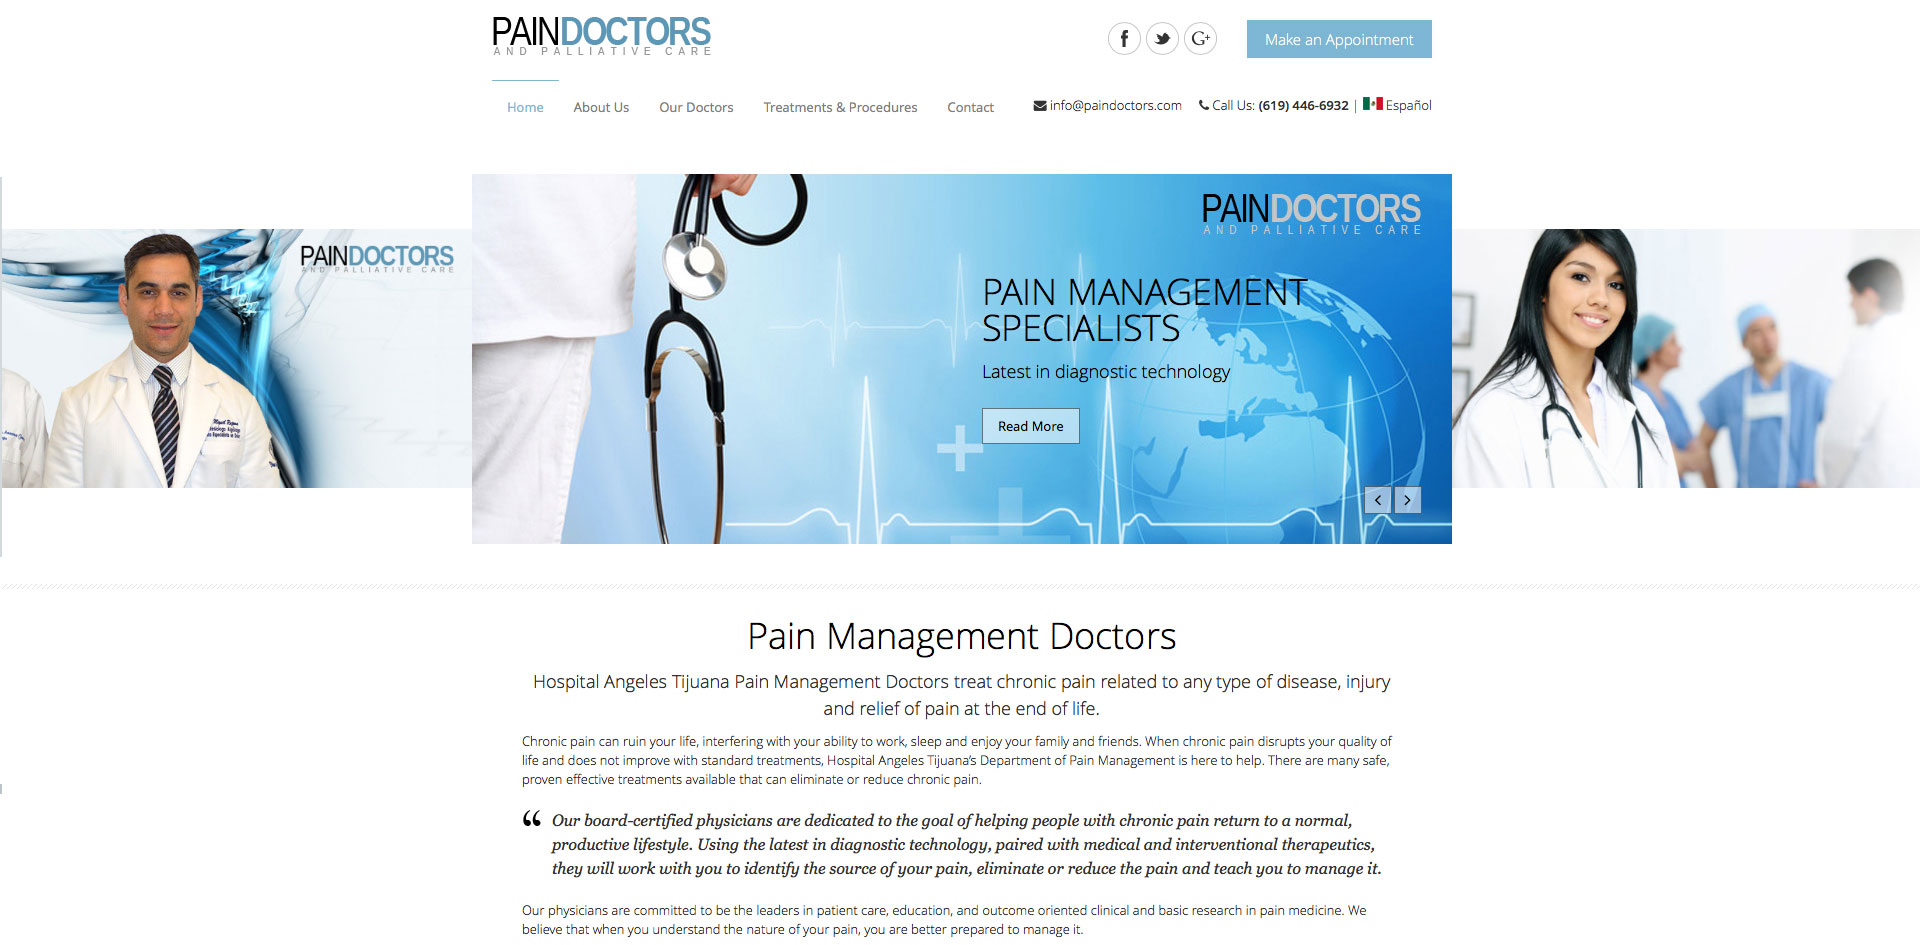 Are there doctors who specialize in pain management?